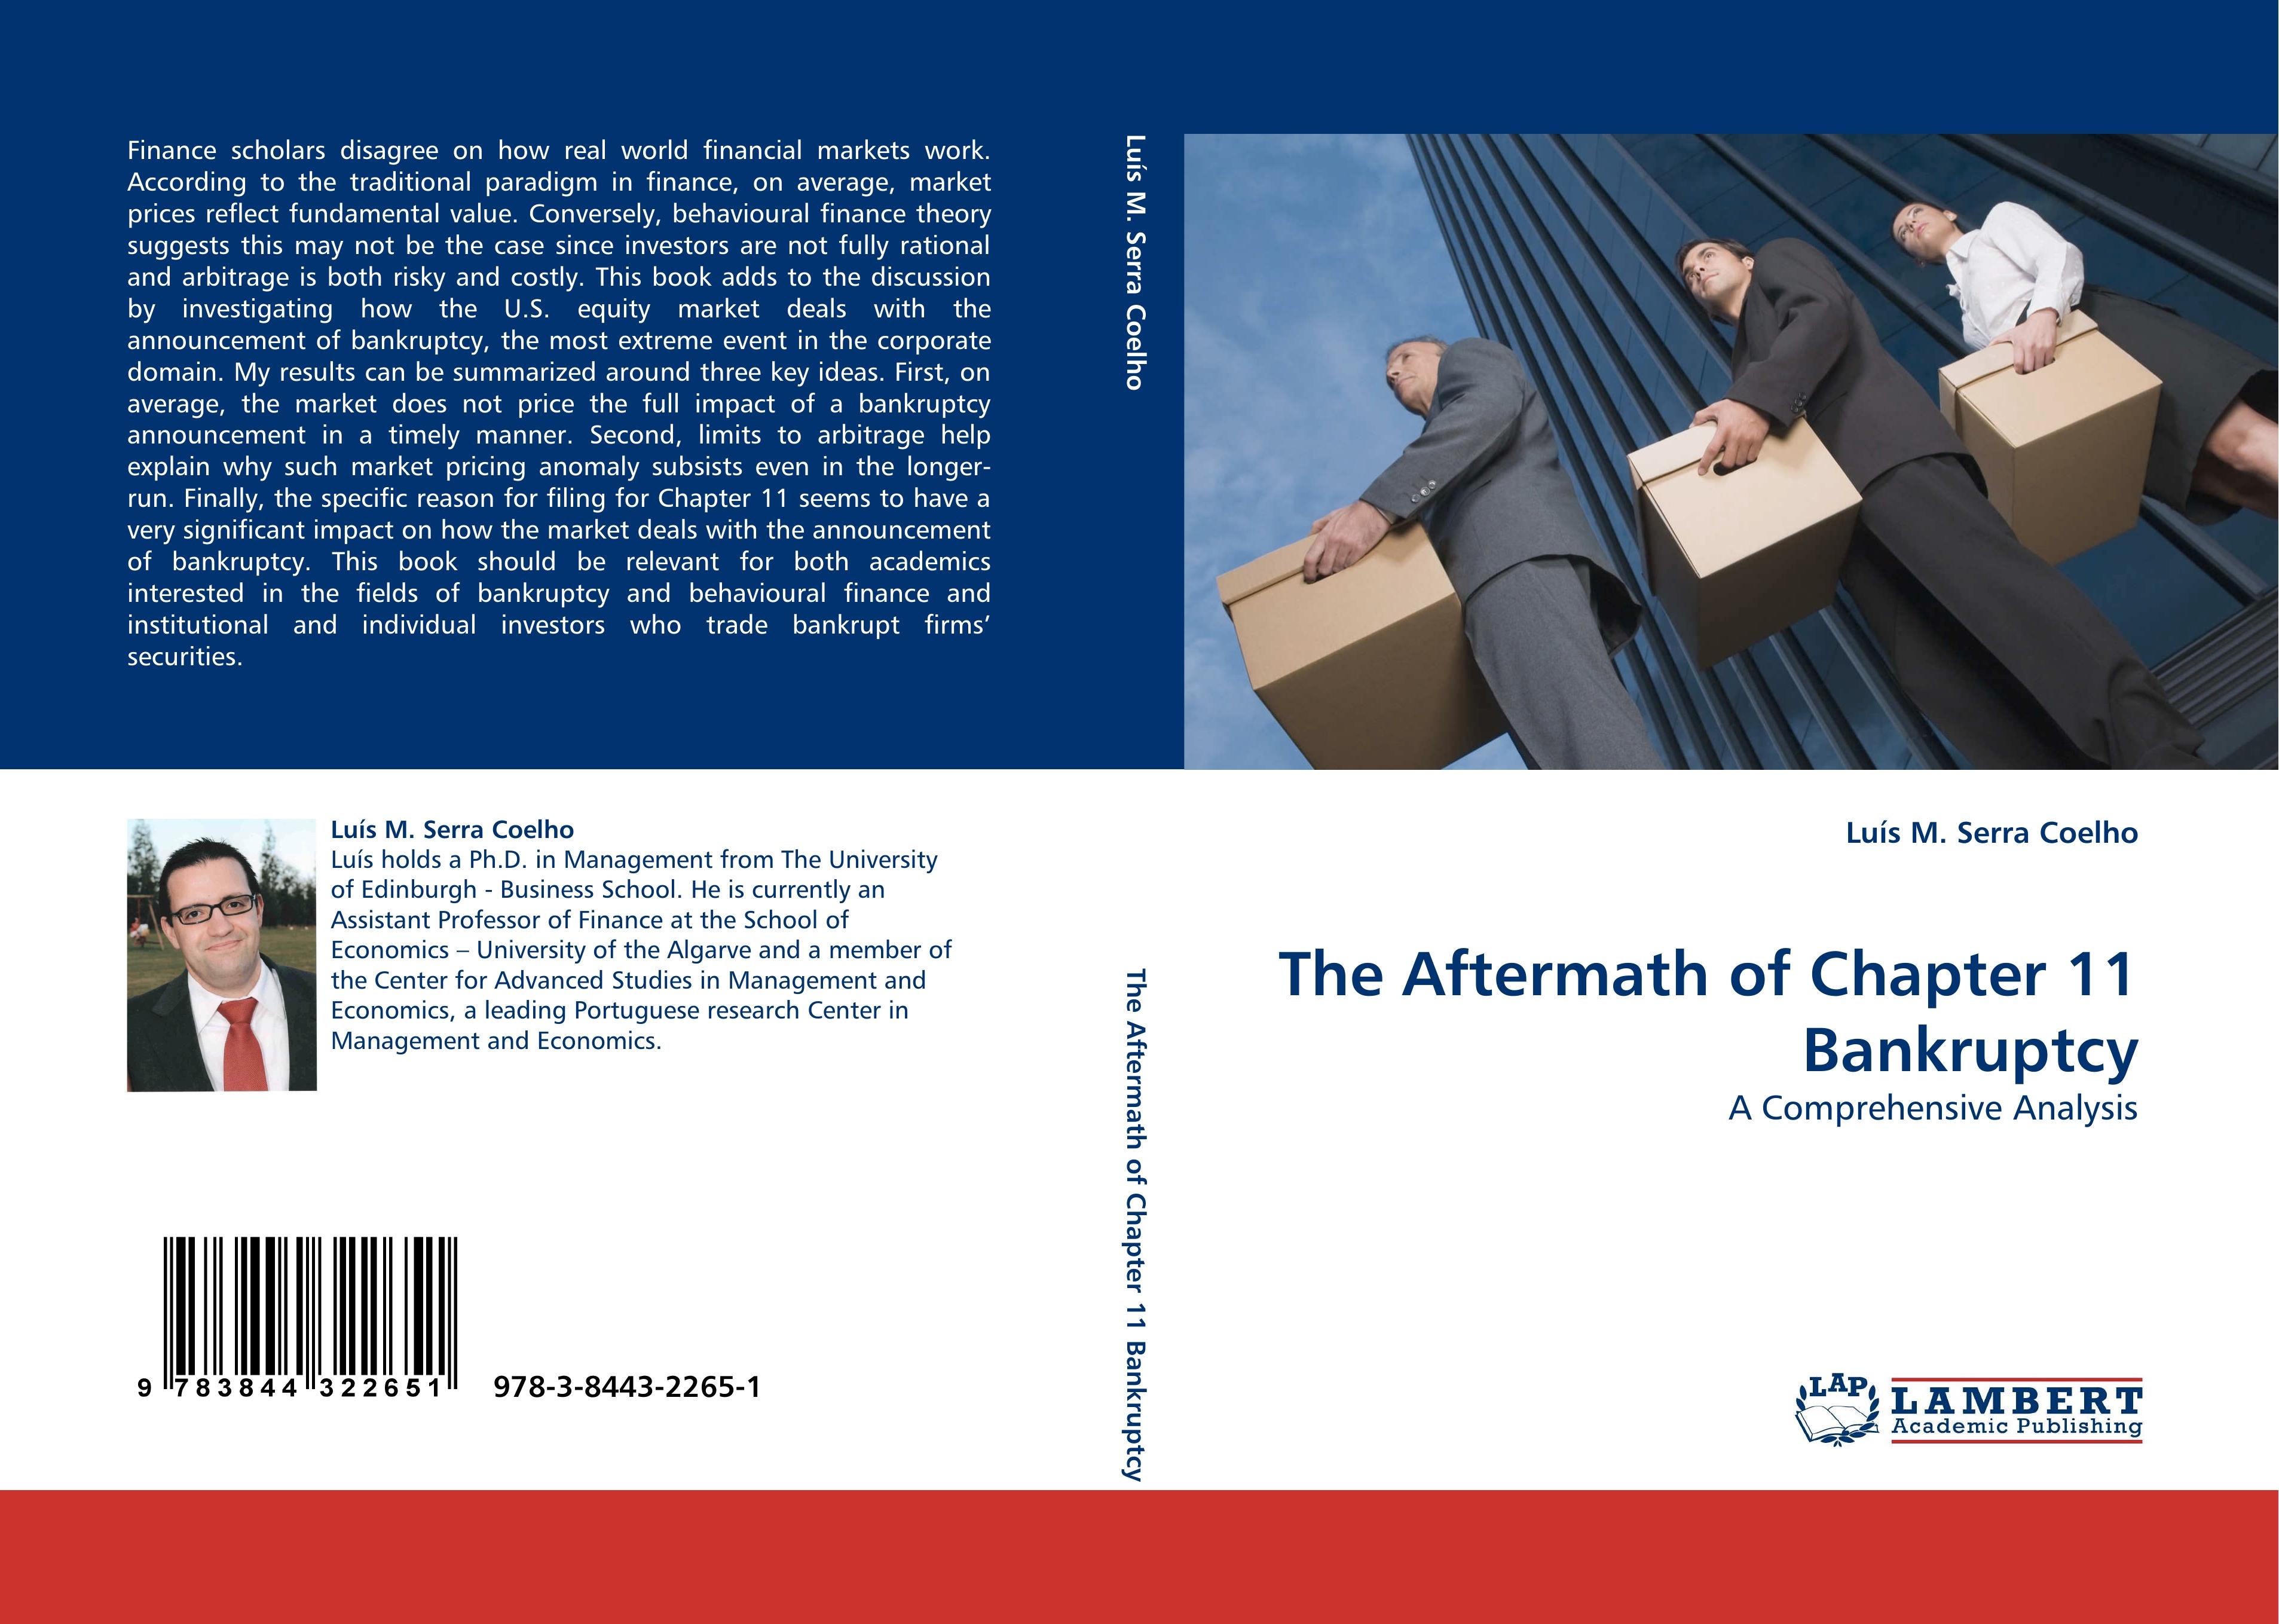 The Aftermath of Chapter 11 Bankruptcy - Luís M. Serra Coelho